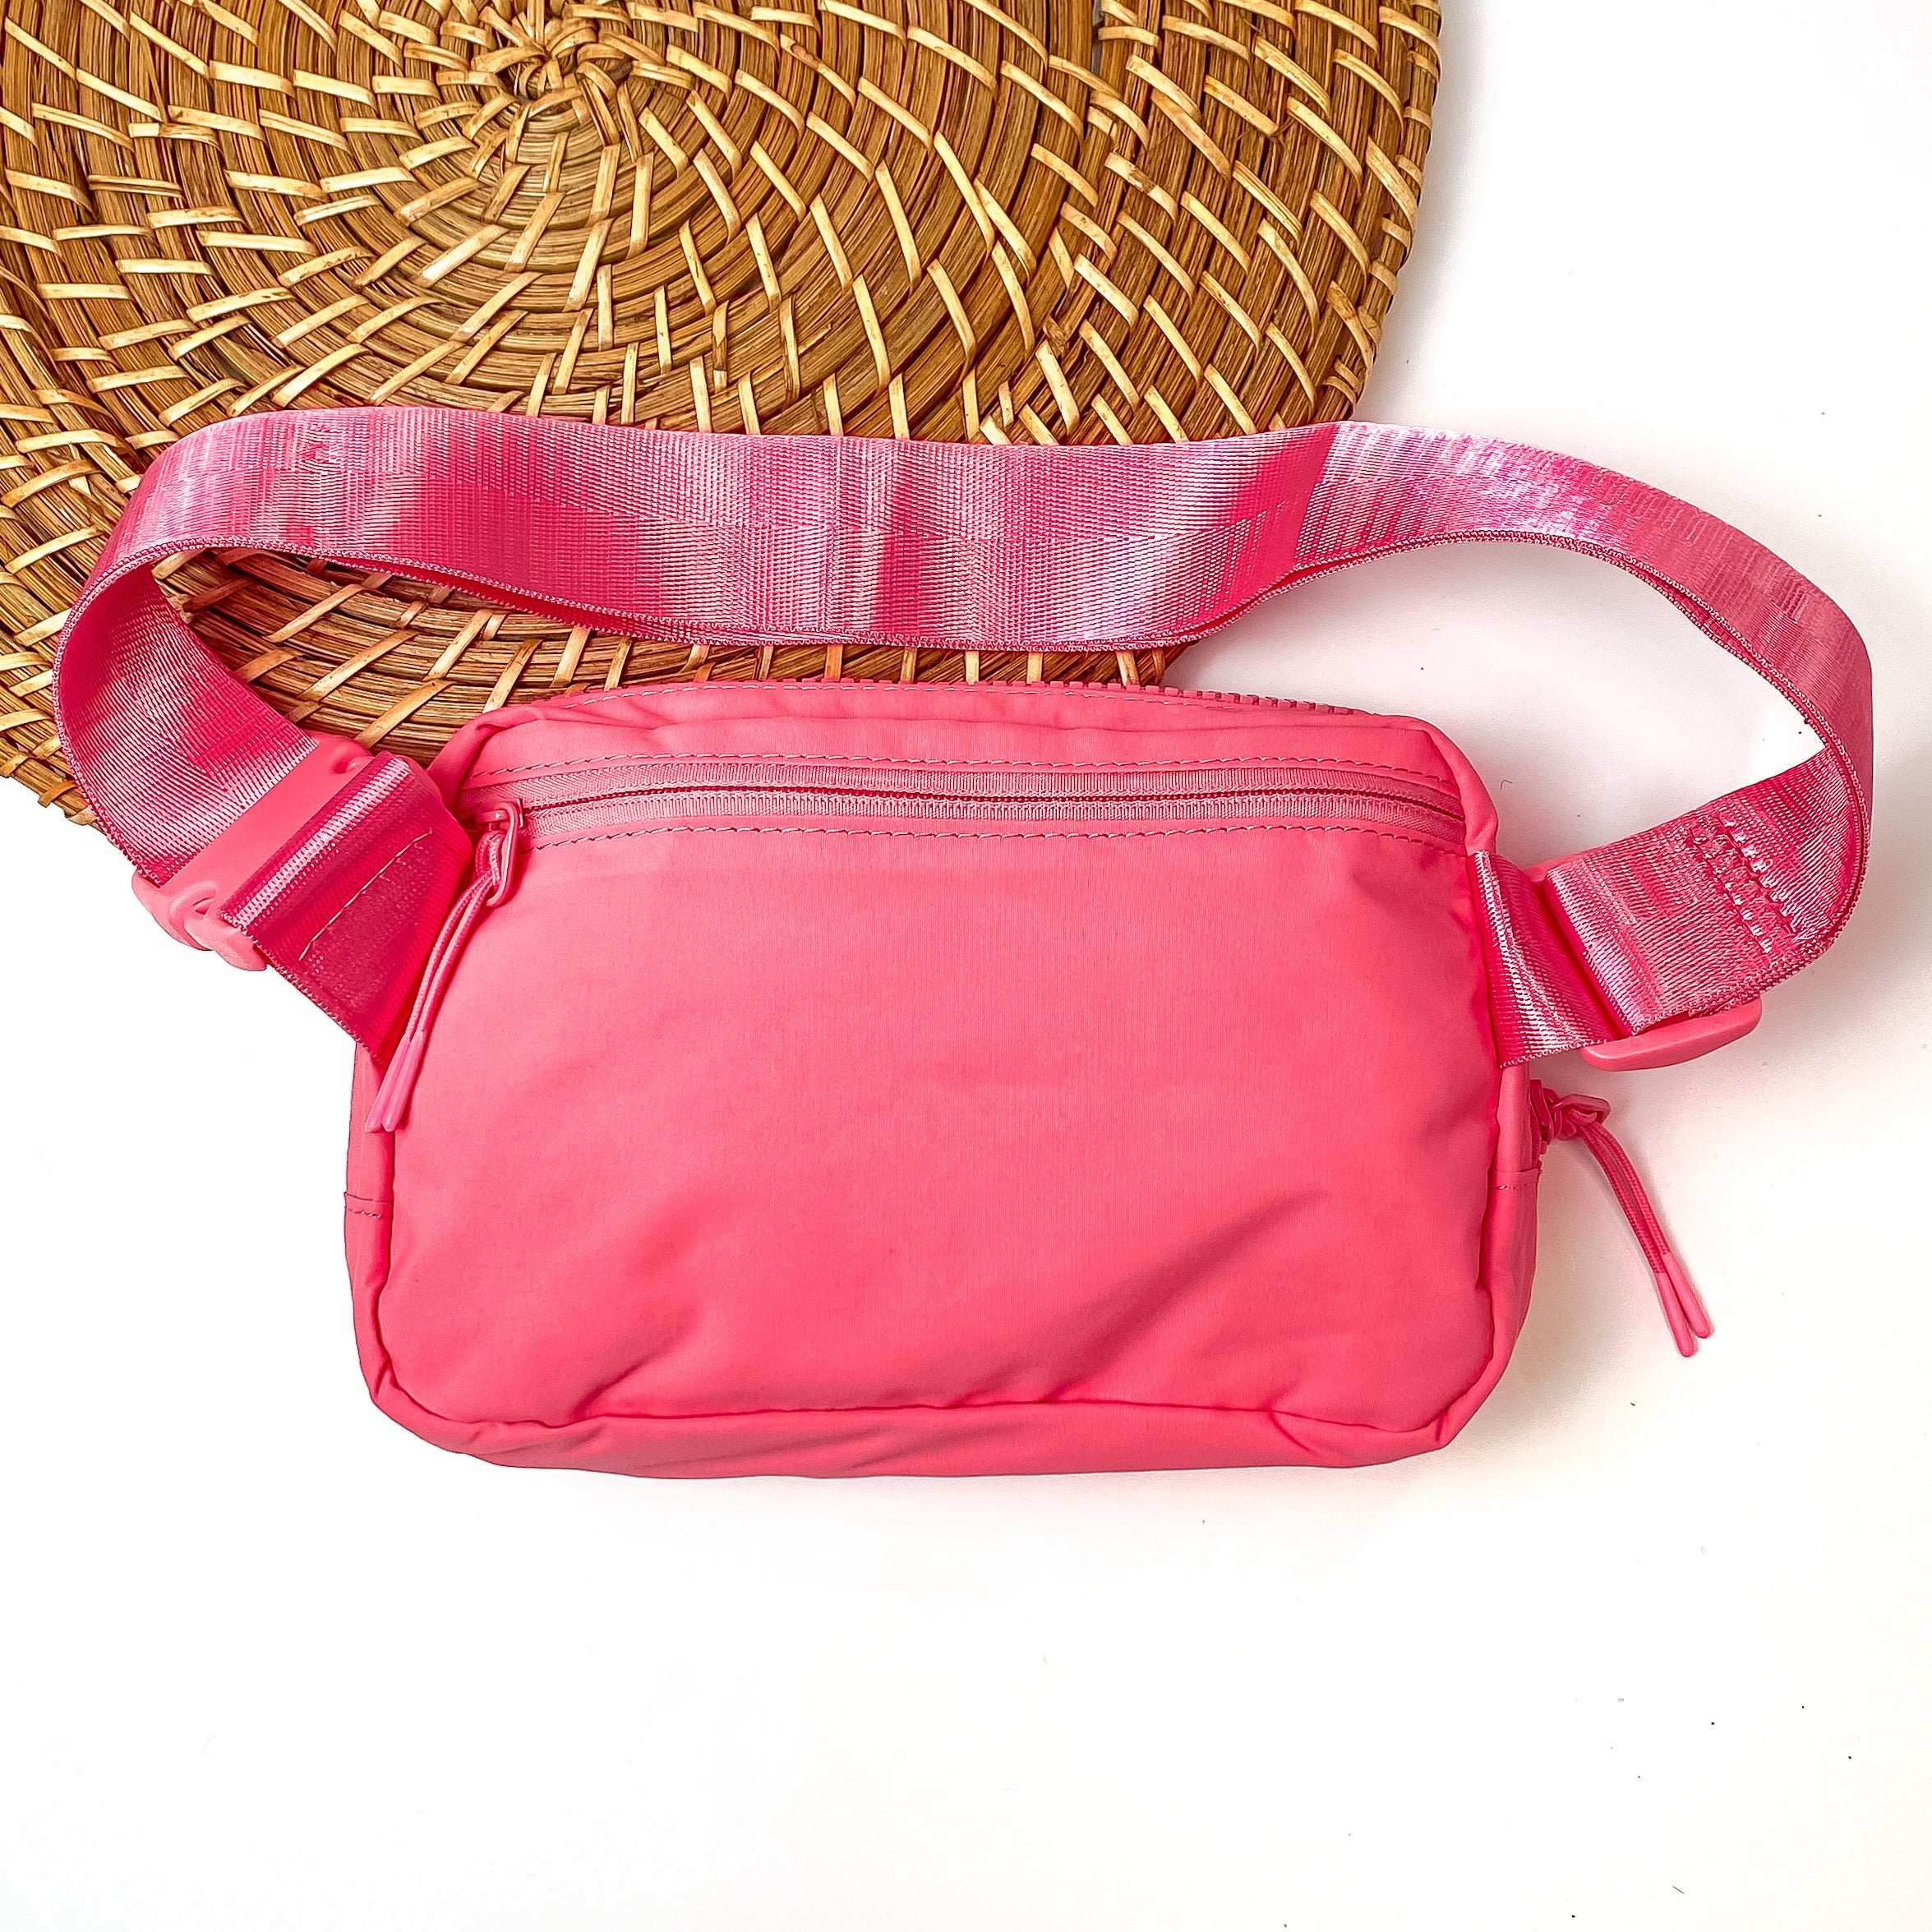 Love the Journey Fanny Pack in Watermelon Pink - Giddy Up Glamour Boutique